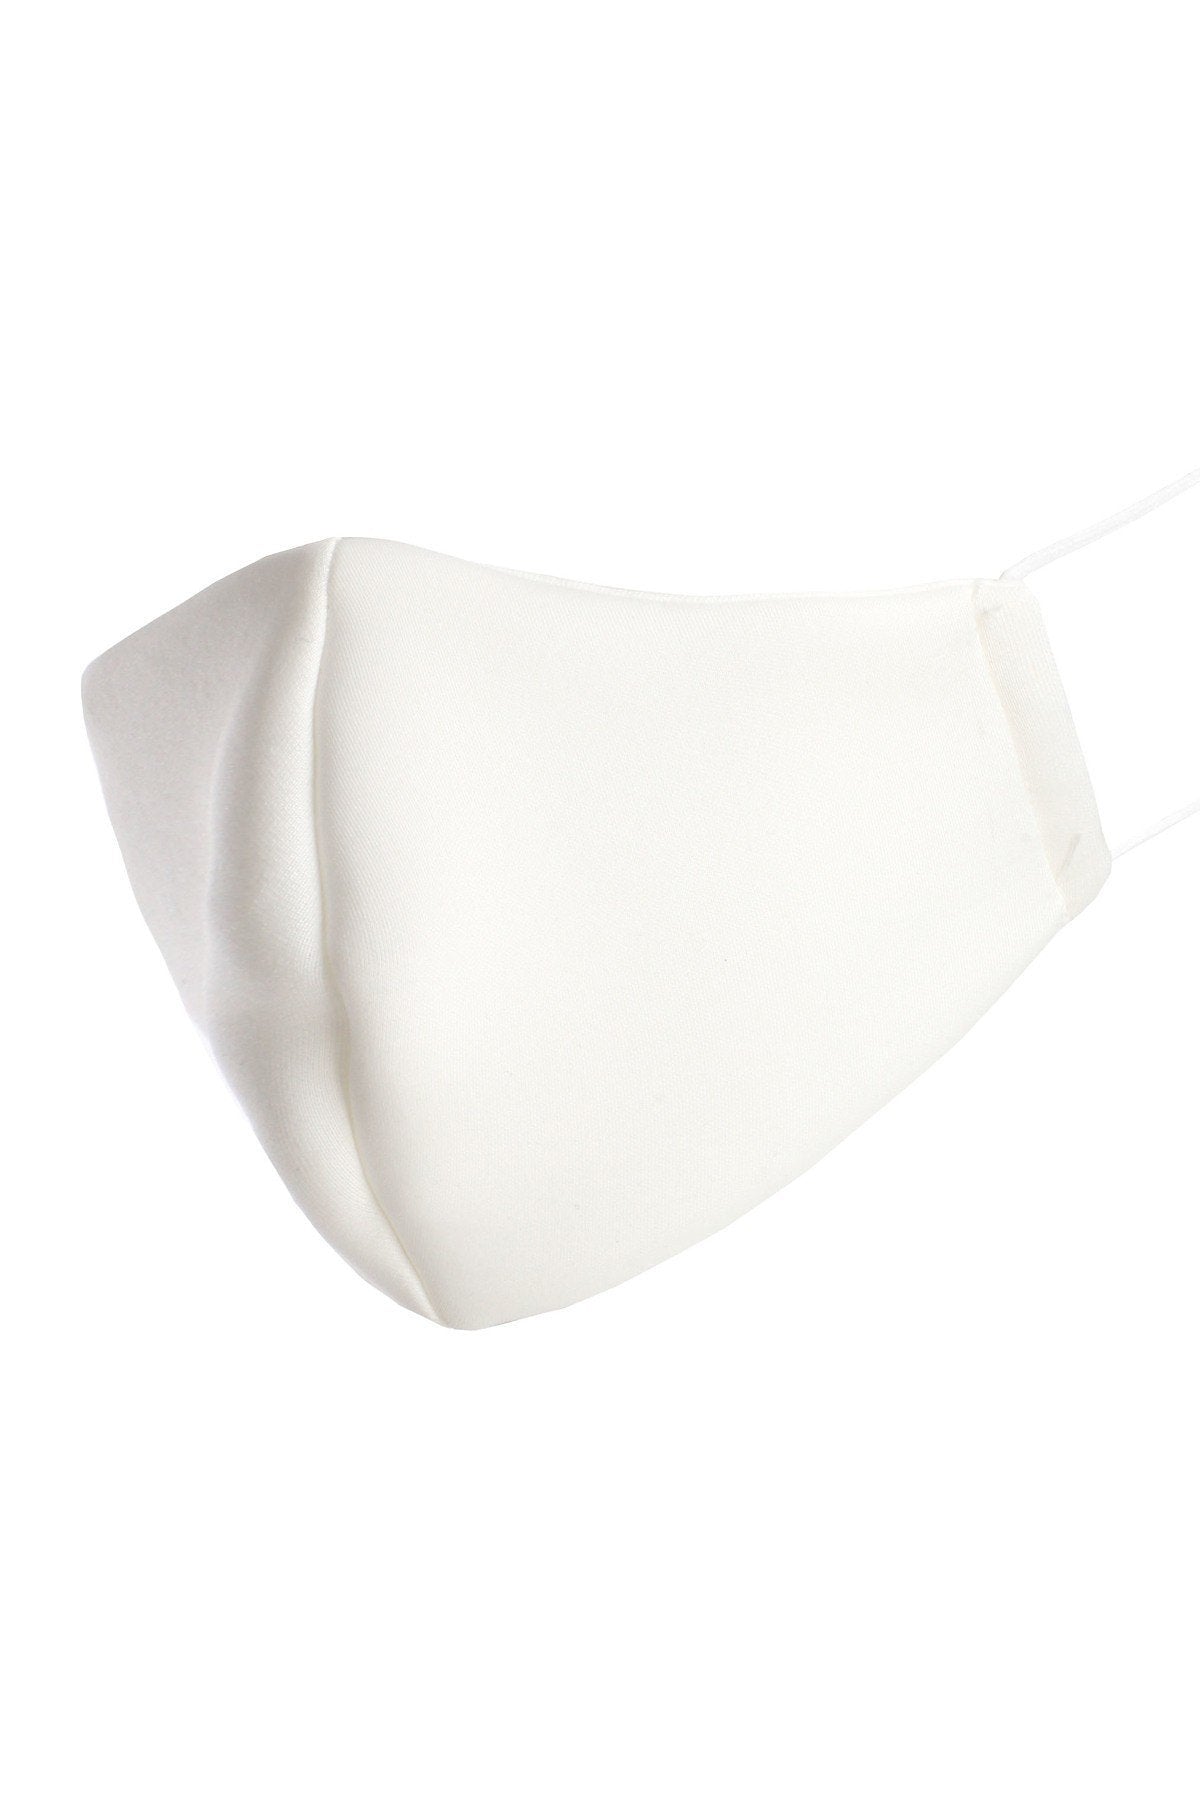 Made In Usa 3d Reusable Water Resistant Face Mask, White - Tigbul's Variety Fashion Shop